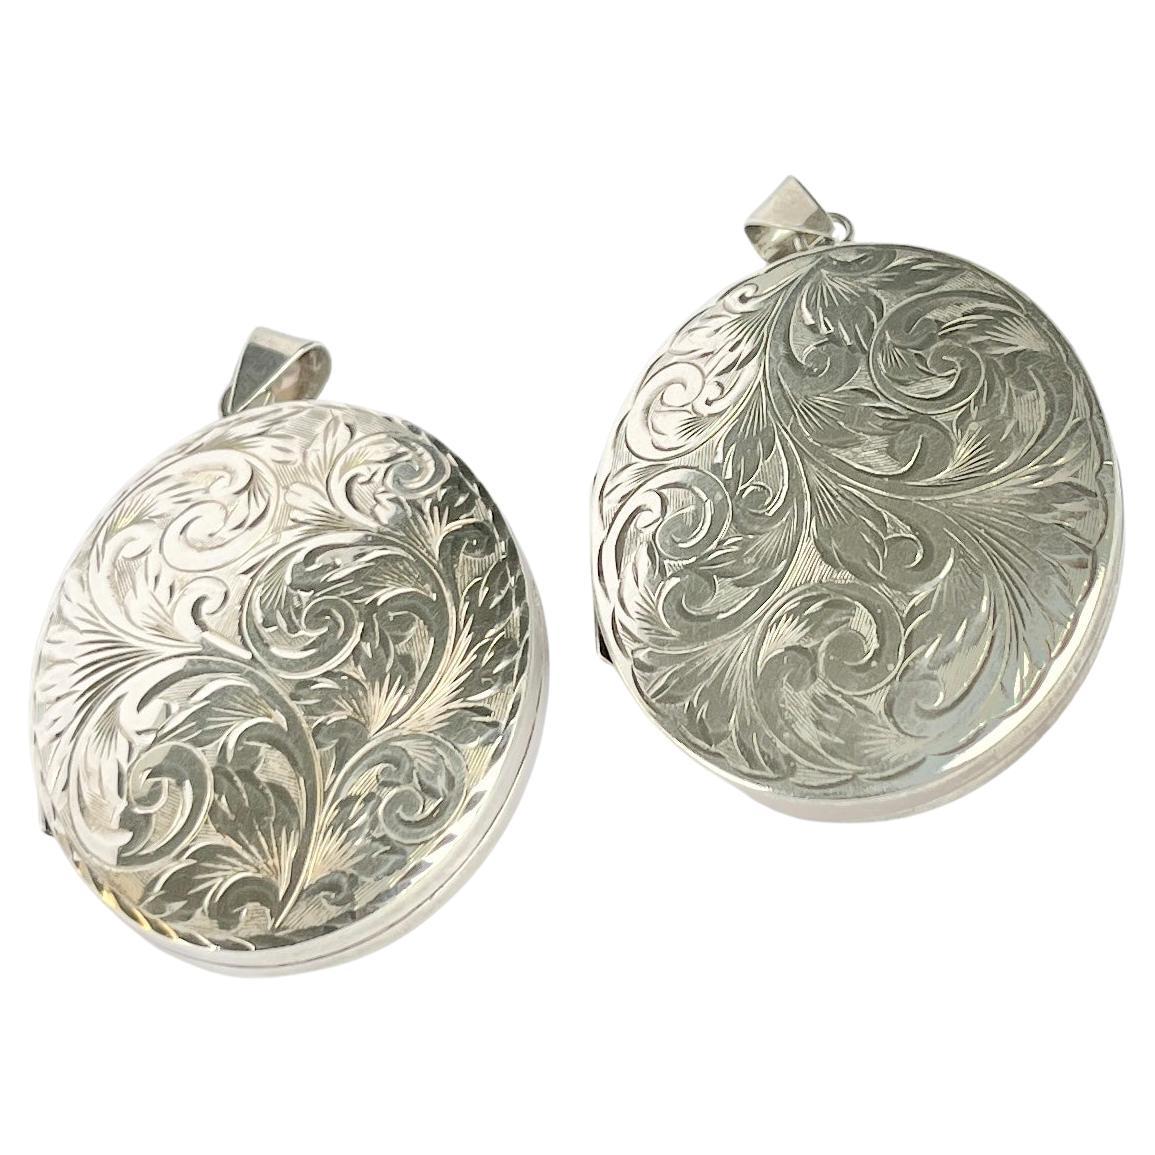 Pair Of Victorian Silver Aesthetic Lockets For Sale